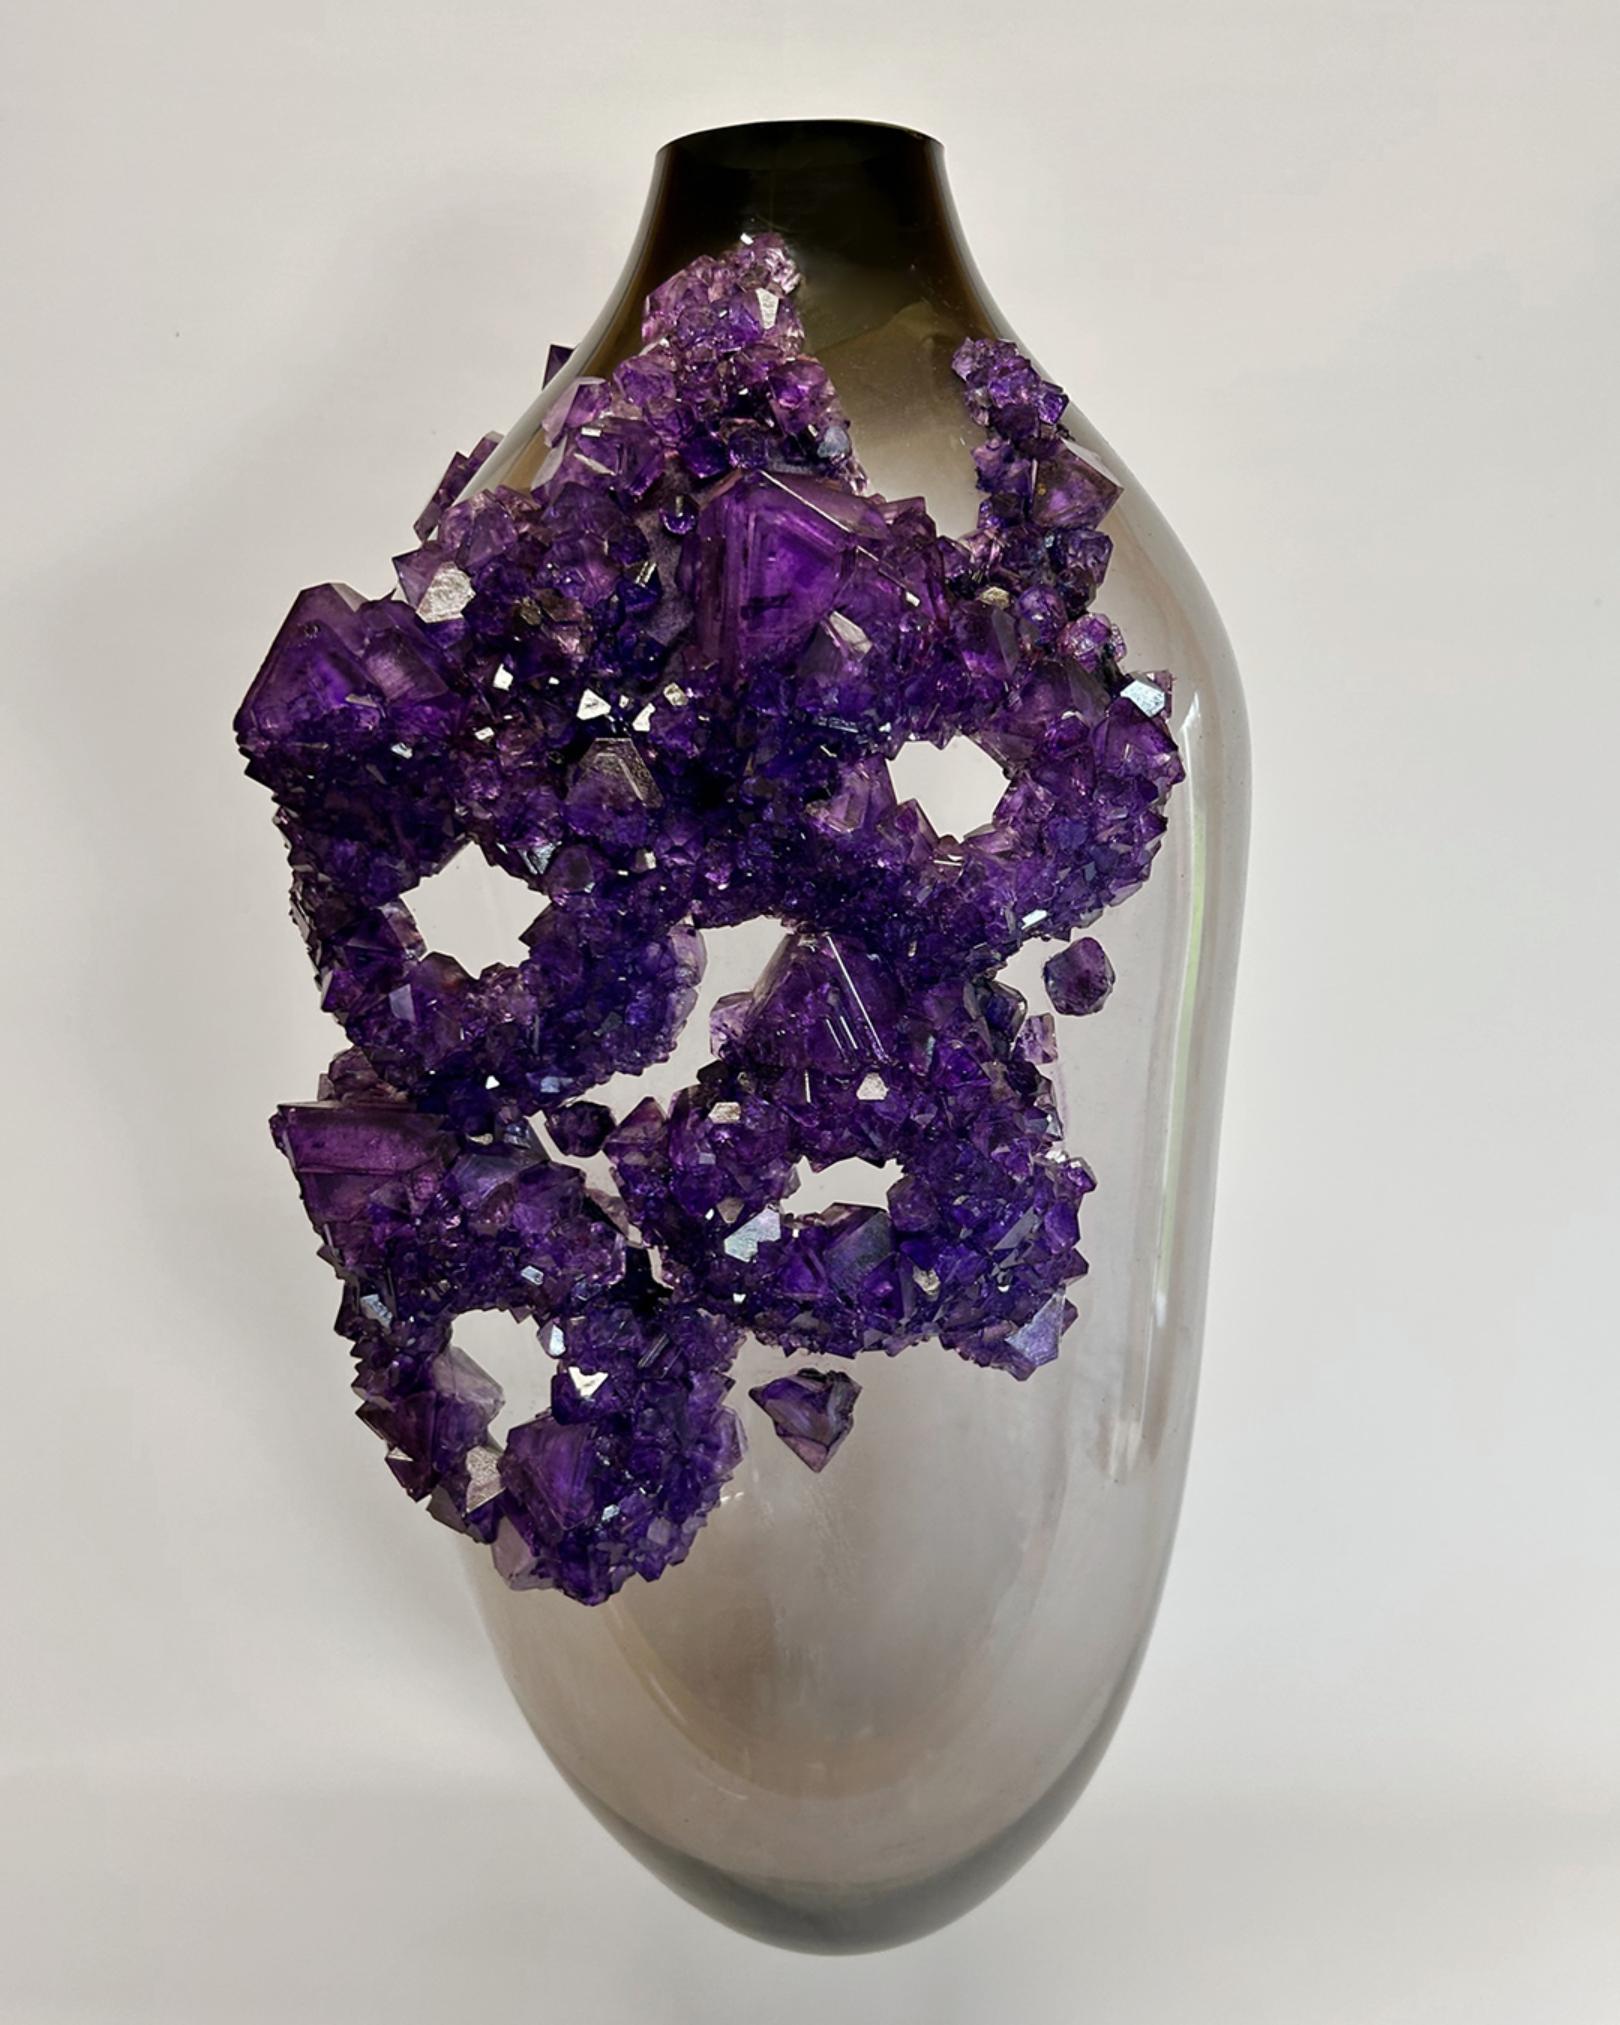 Emperors Breath Vessel 2 by Mark Sturkenboom
Dimensions: W 35 x D 35 x H 75 cm
Materials: Mouth Blown Glass, Overgrown Crystals


Mark Sturkenboom (Driebergen, 1983) is an artist that graduated with honors in 2012 at Artez Academy for the Arts in